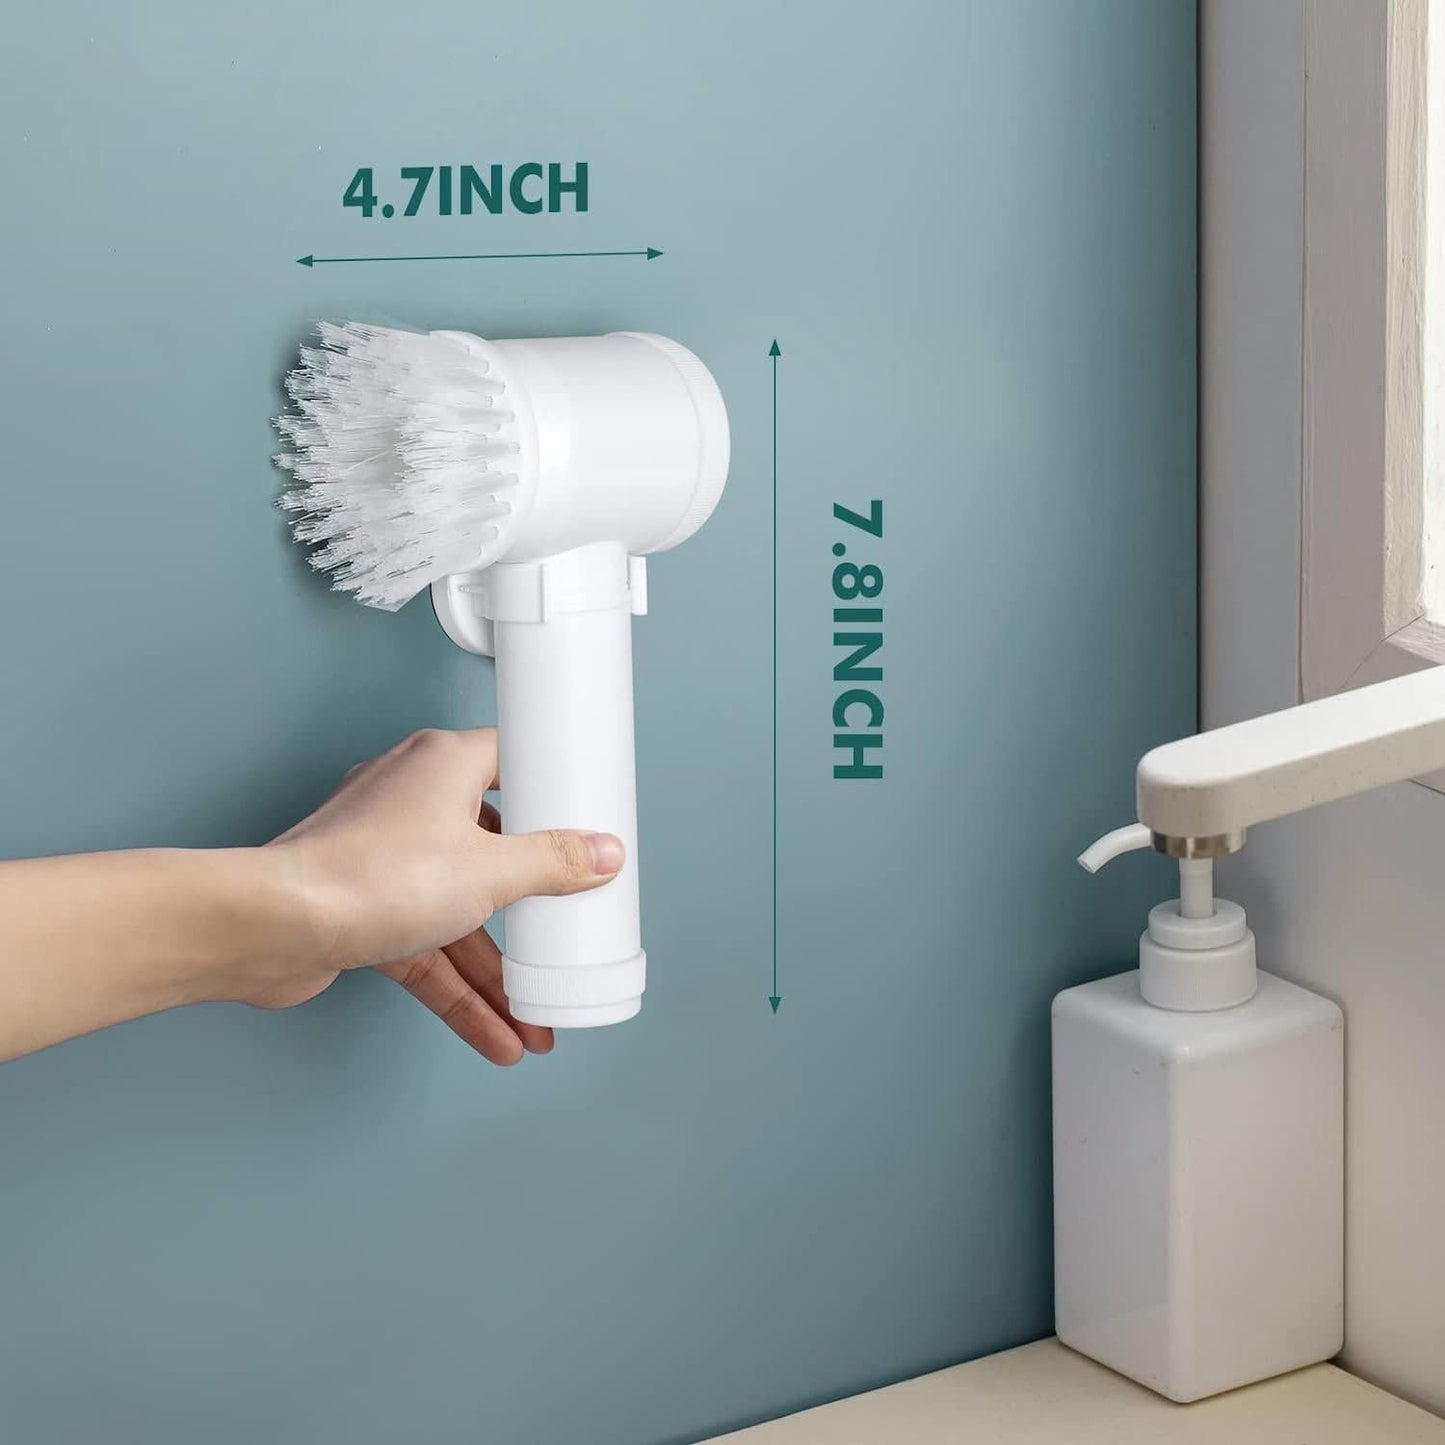 5-in-1 TurboClean Handheld Cleaning Brush Scrubber